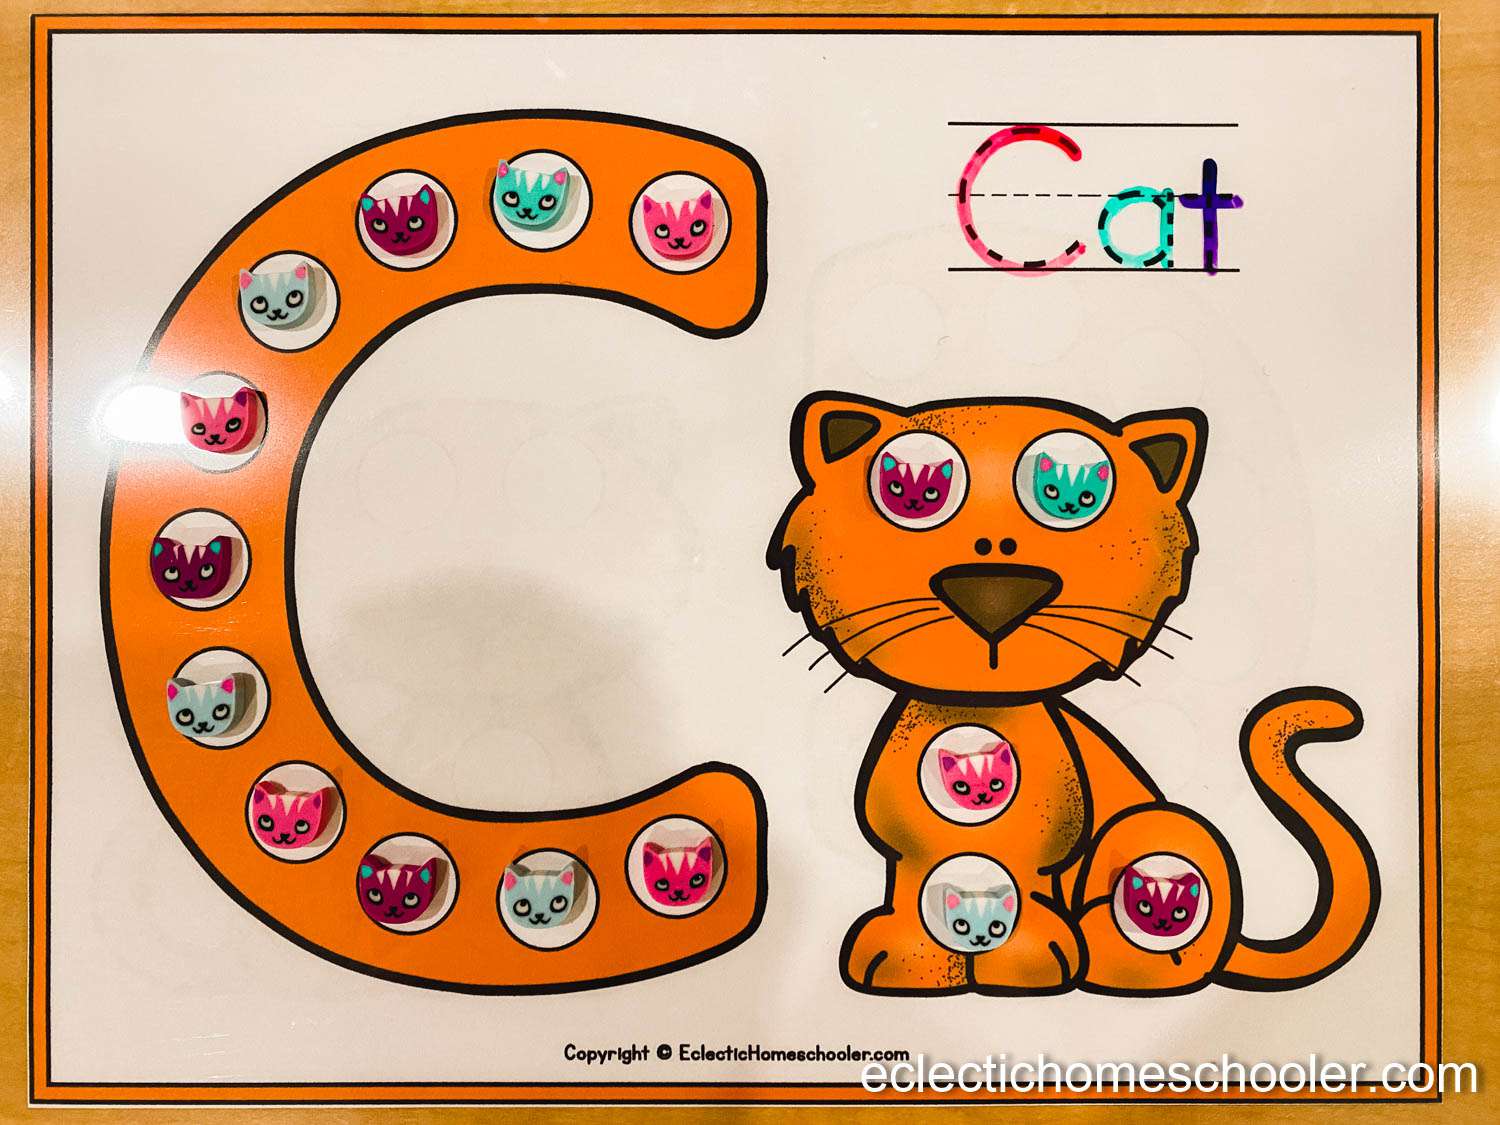 Letter C Free Printable Do a Dot Pages With Cat Shaped Erasers